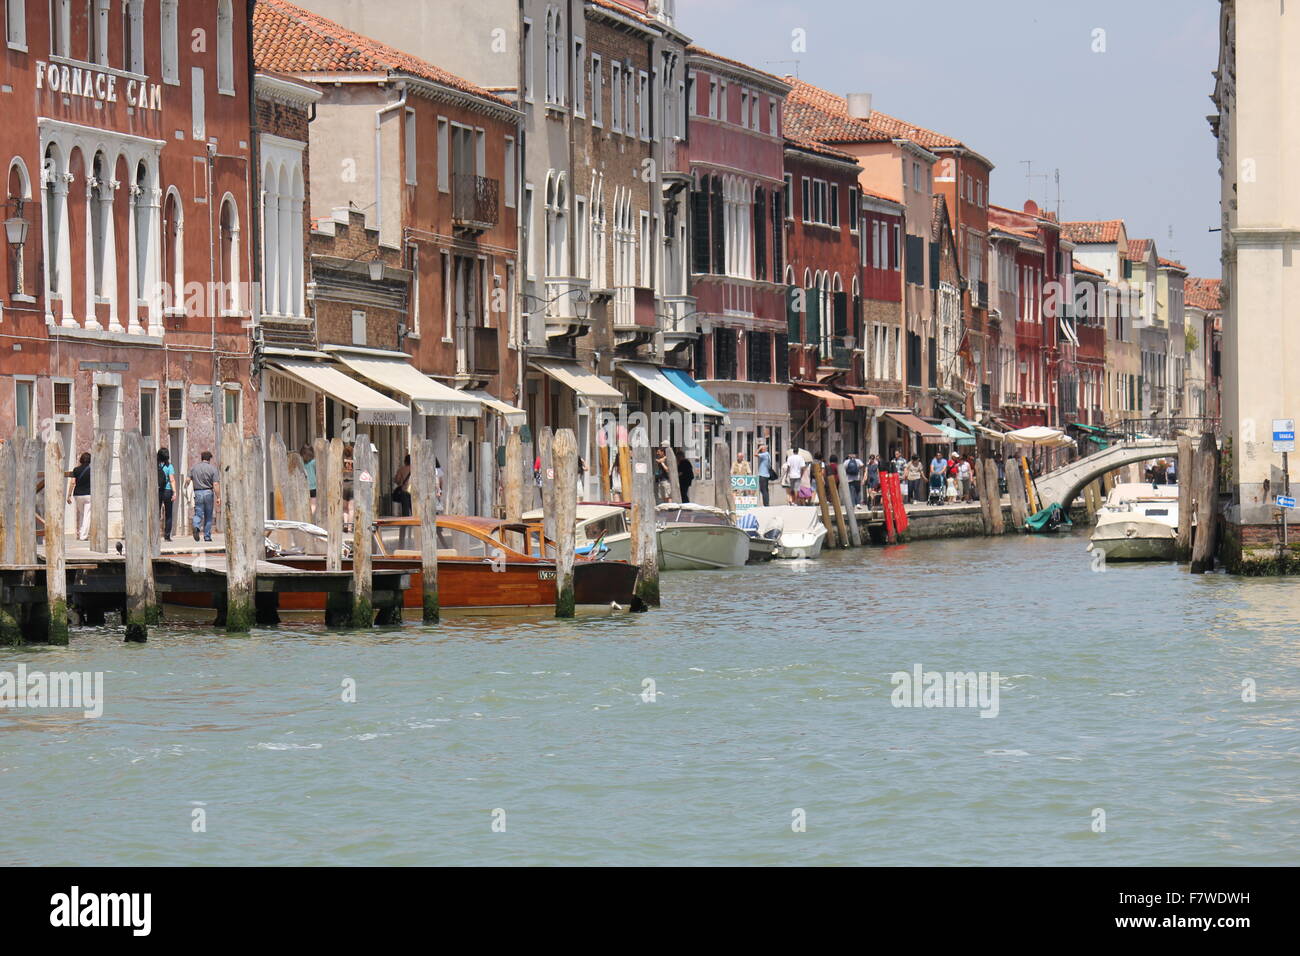 Murano, Italy, June 6 2014: Tyical view of the little island of Murano, near Venice, famous for its colored house and canals Stock Photo